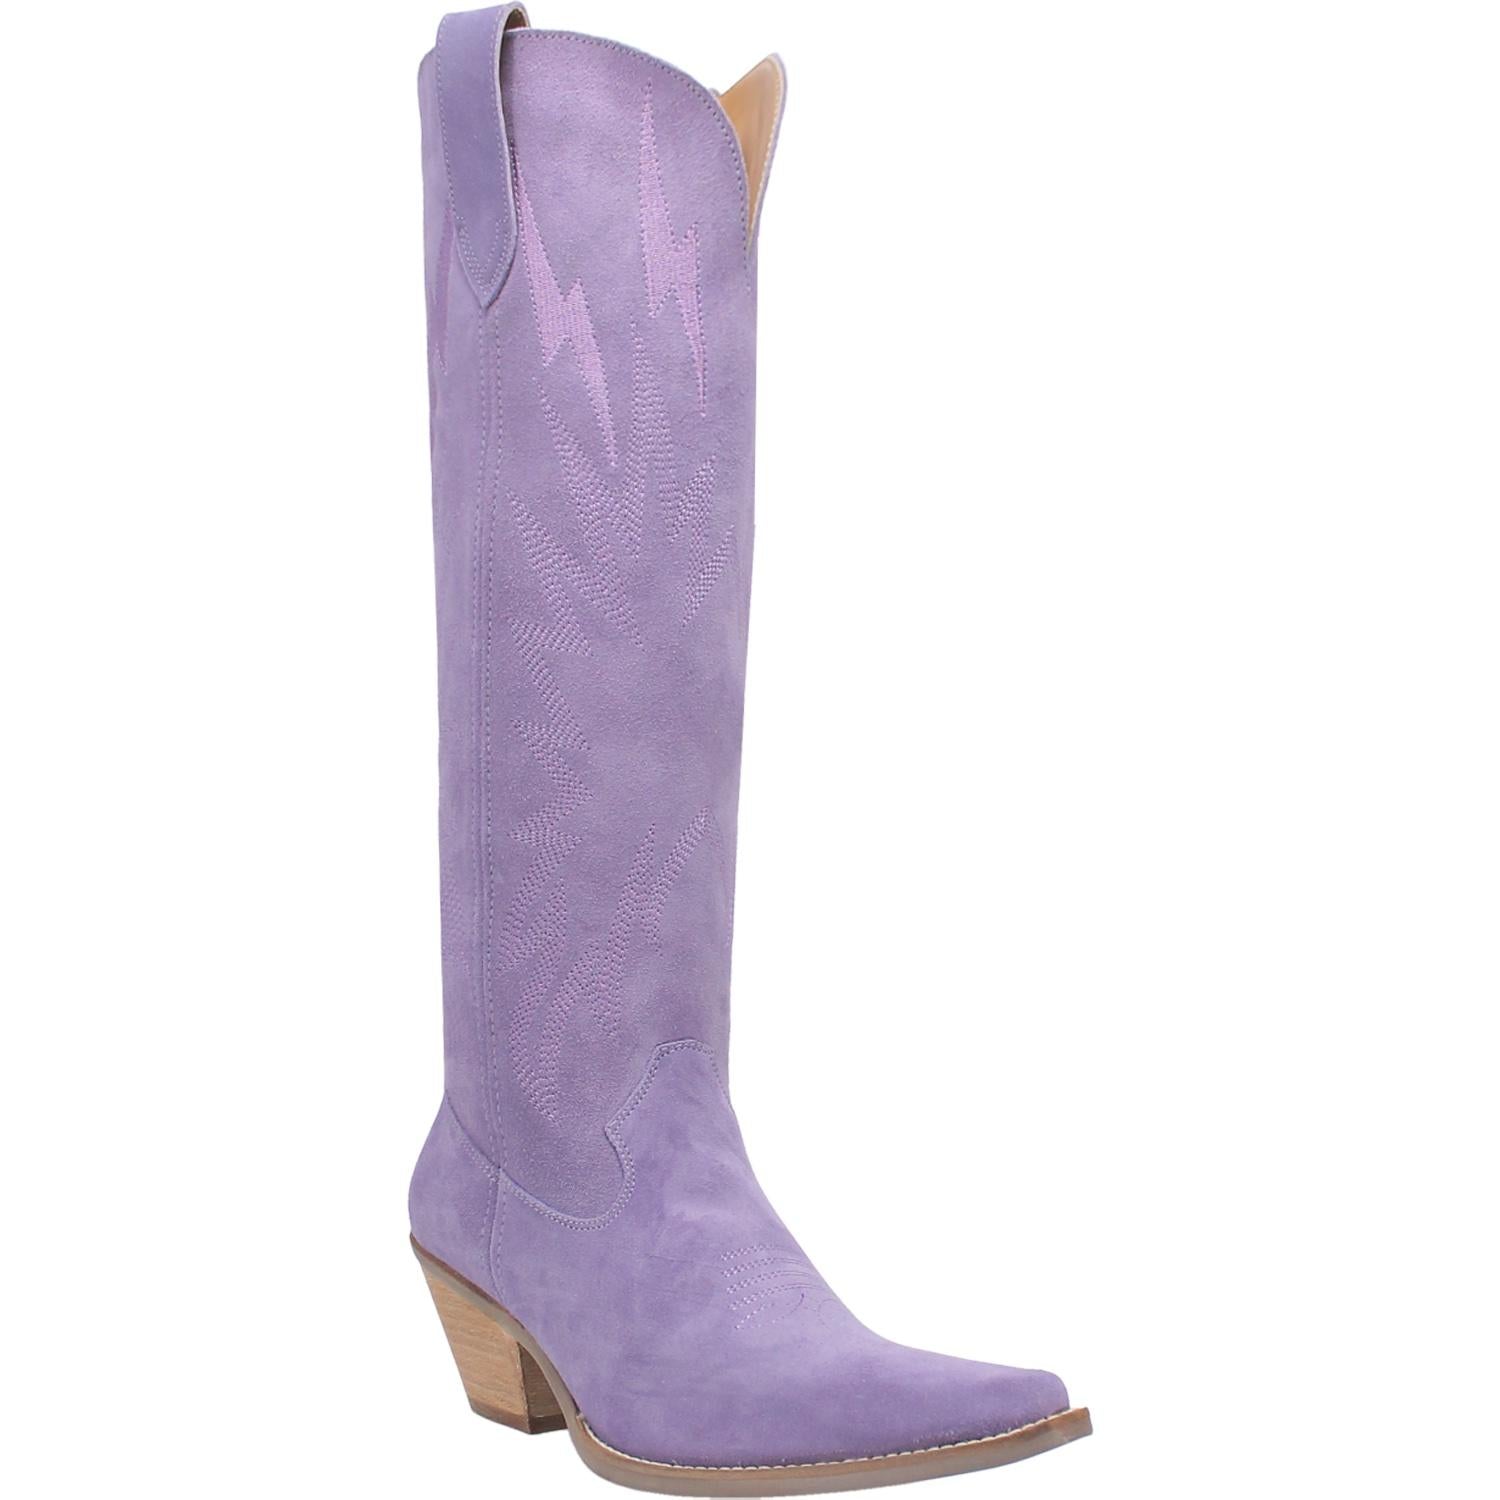 A tall periwinkle boot featuring rhinestone lightning designs, small heel, leather straps, and a V cut at the top. Item is pictured on a plain white background